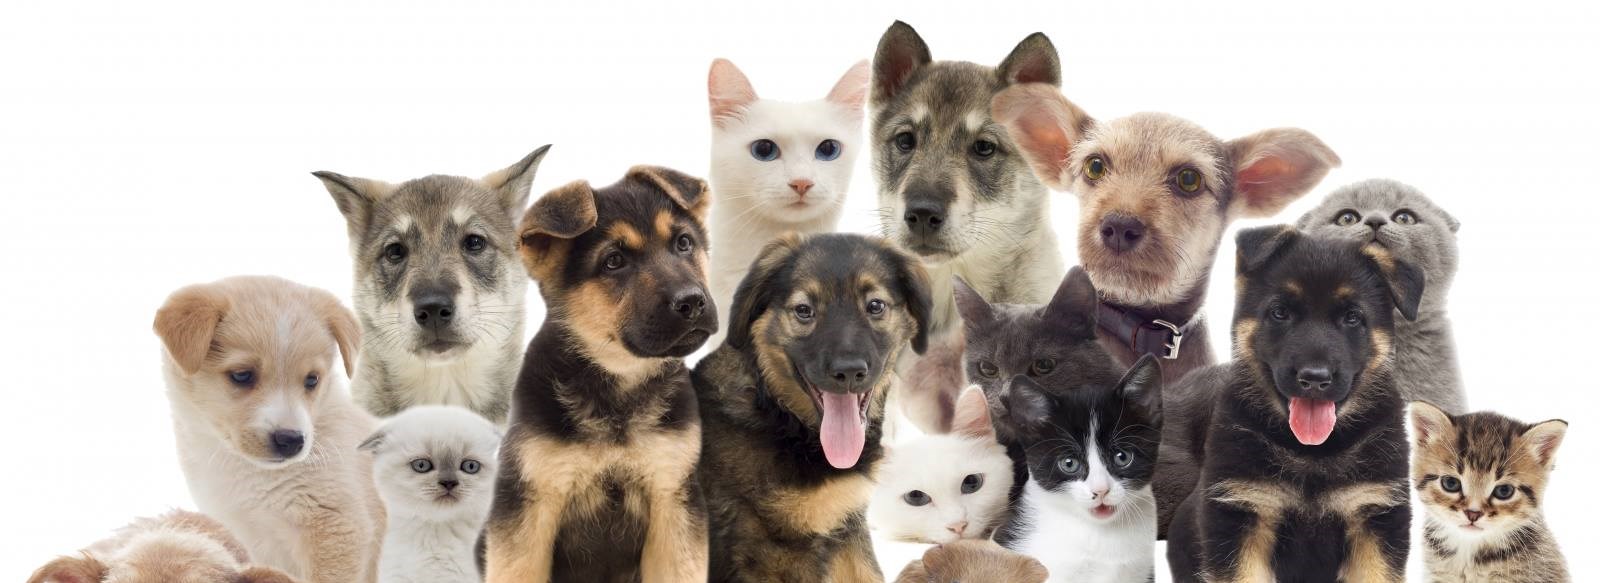 Photo of dogs and cats